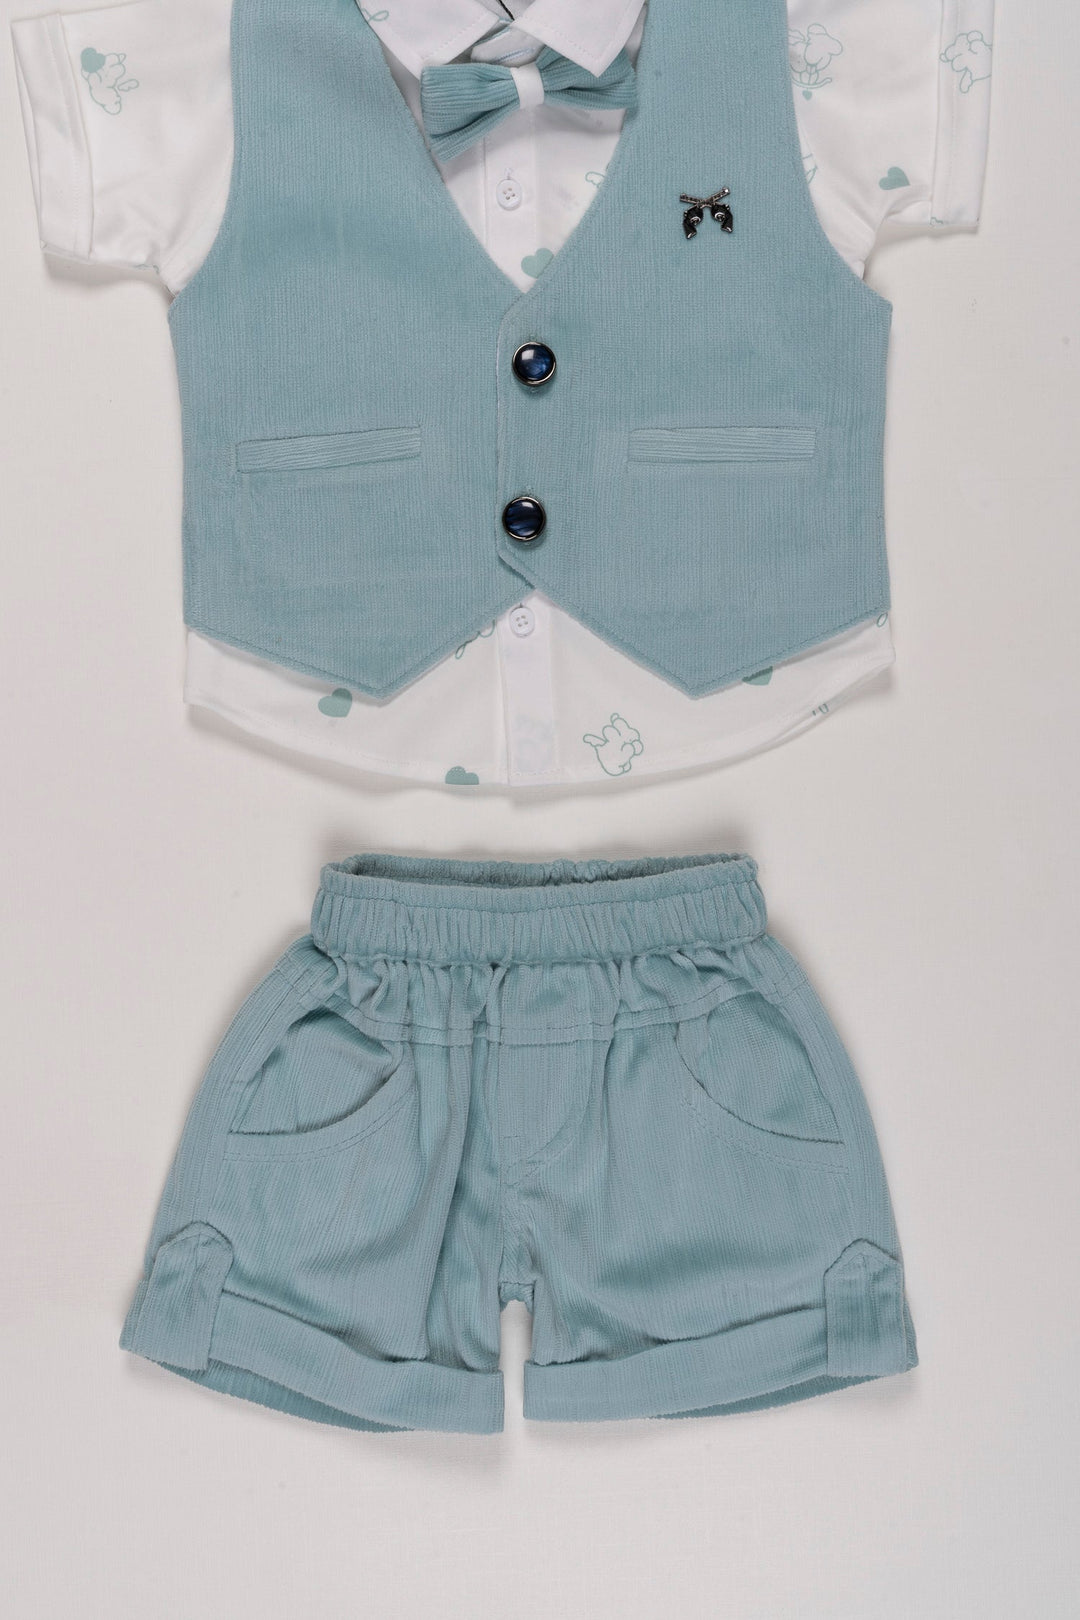 The Nesavu Boys Casual Set Boys Mint Green Vest & Shorts Set with Embroidered Shirt - Toddler's Dressy Casual Nesavu Mint Green Boys Vest and Shorts Set | Embroidered Dressy Casual Outfit | The Nesavu